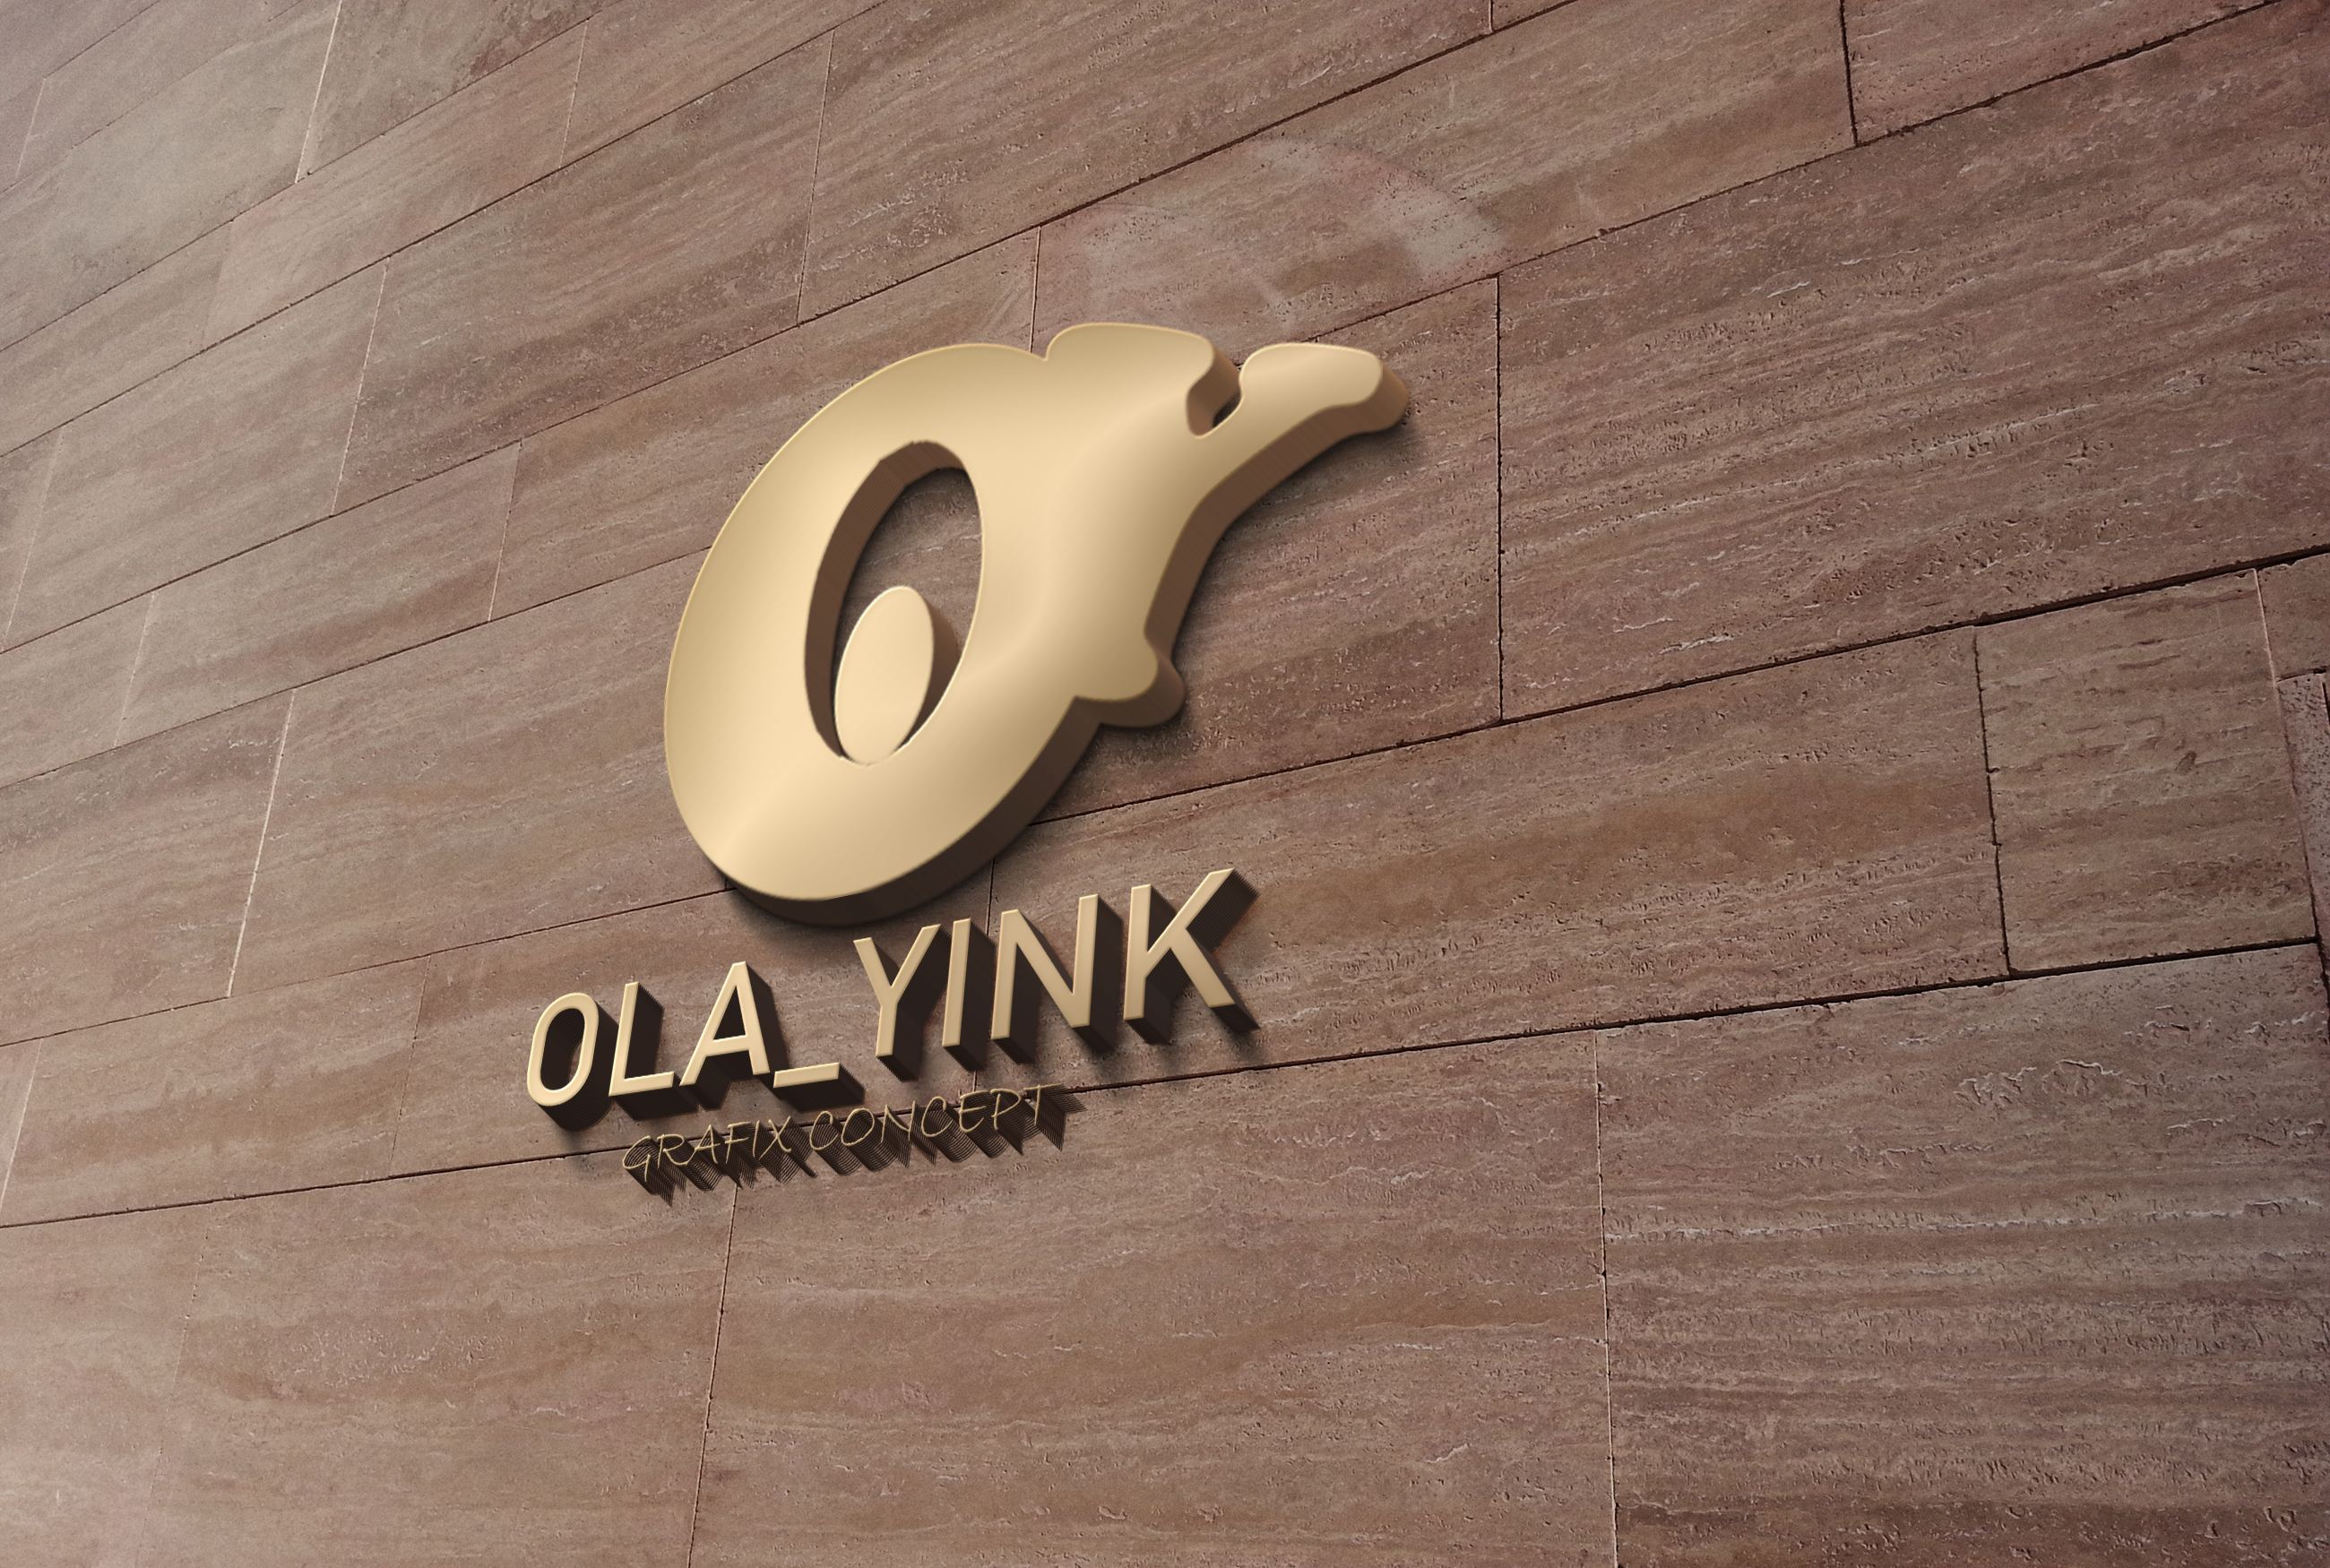 Olayink Graphic Design provider